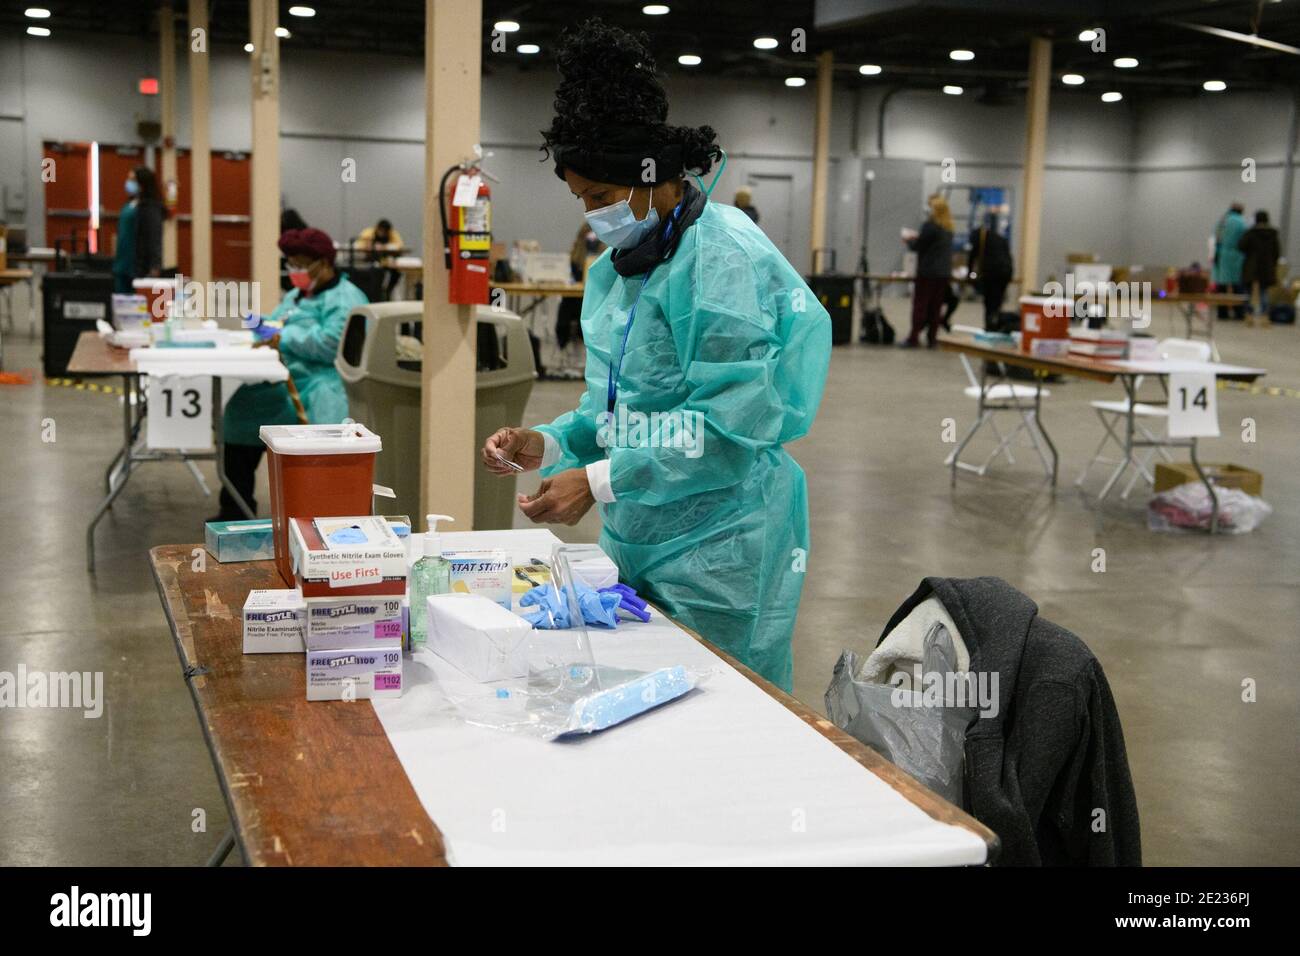 Dallas, Texas, USA. 11th Jan, 2021. A Dallas County TX Health and Human Services staff member organizes the table where she will administer COVID vaccine to residents at Dallas County Fair Park mega-vaccination center in Fair Park.The site is a joint effort between the city and county, will vaccinate up to 2,000 people a day, depending upon supply. The site opened as Texas shifts from smaller distribution sites to 'hubs'' that can vaccinate thousands a day. Credit: Avi Adelman/ZUMA Wire/Alamy Live News Stock Photo